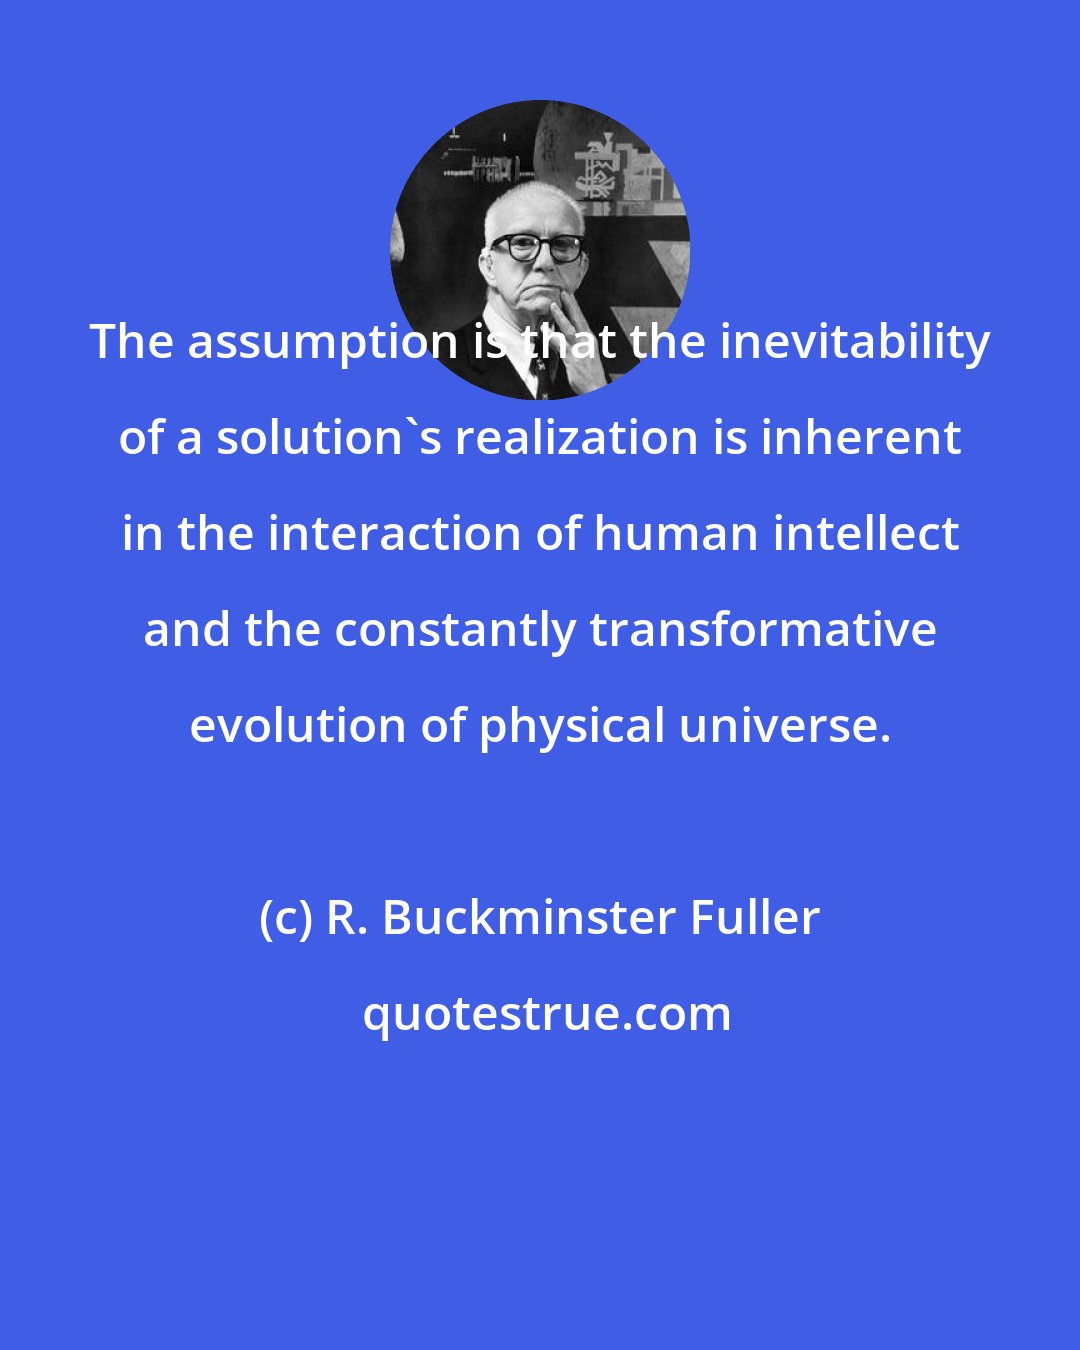 R. Buckminster Fuller: The assumption is that the inevitability of a solution's realization is inherent in the interaction of human intellect and the constantly transformative evolution of physical universe.